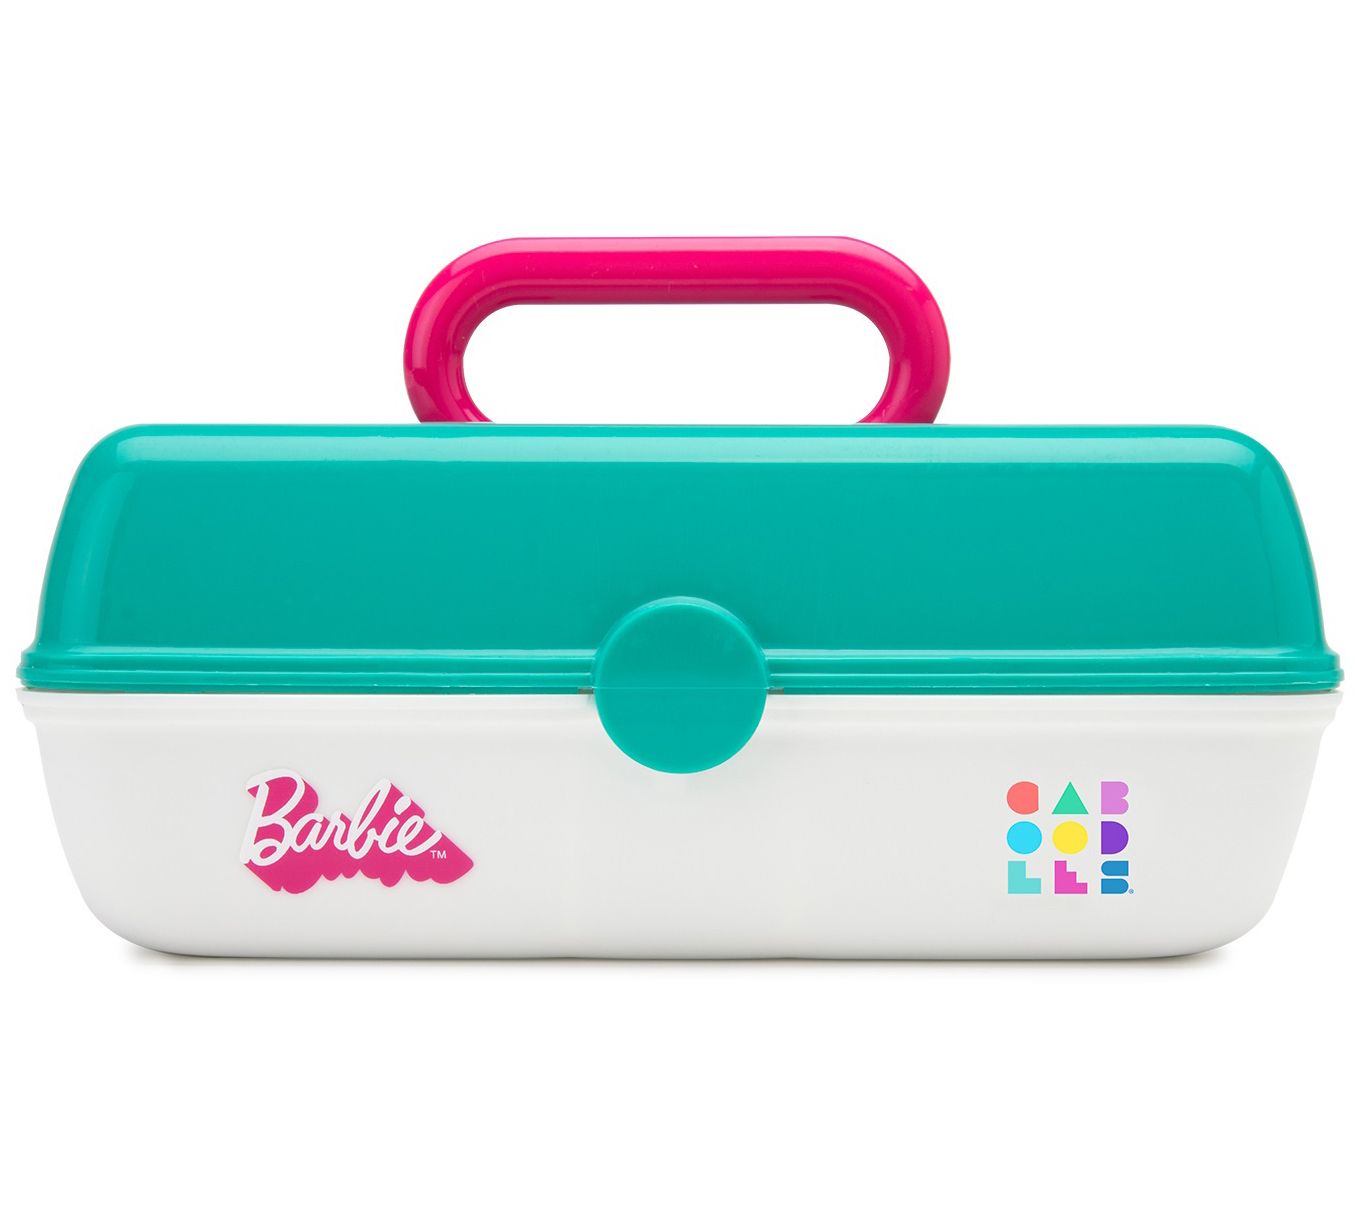 Caboodle White Petite Carrying Case With Mirror